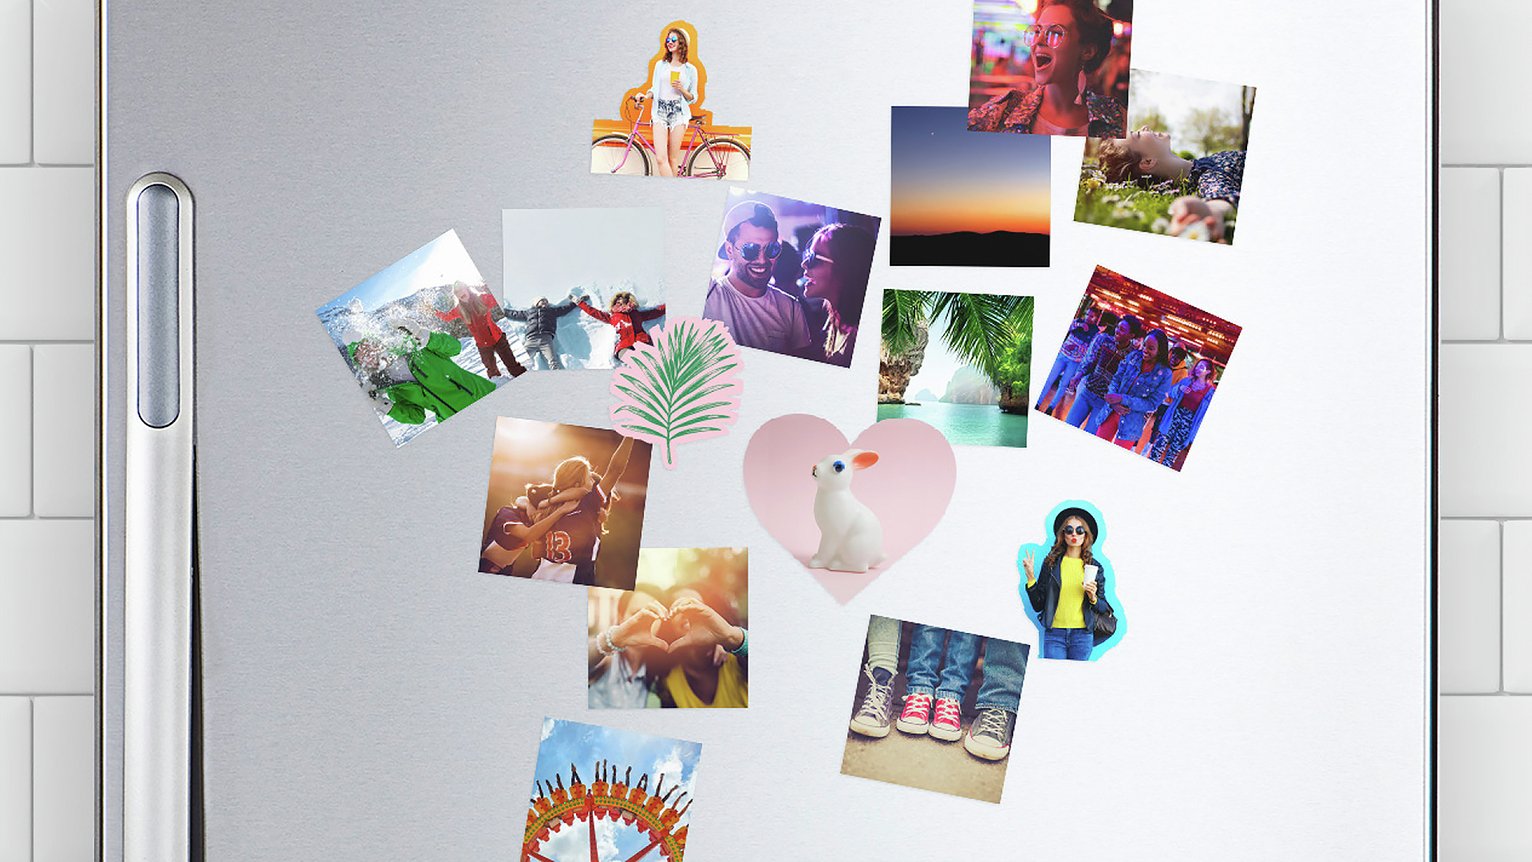 Canon MG-101 6x4 Inch Magnetic Photo Paper Review